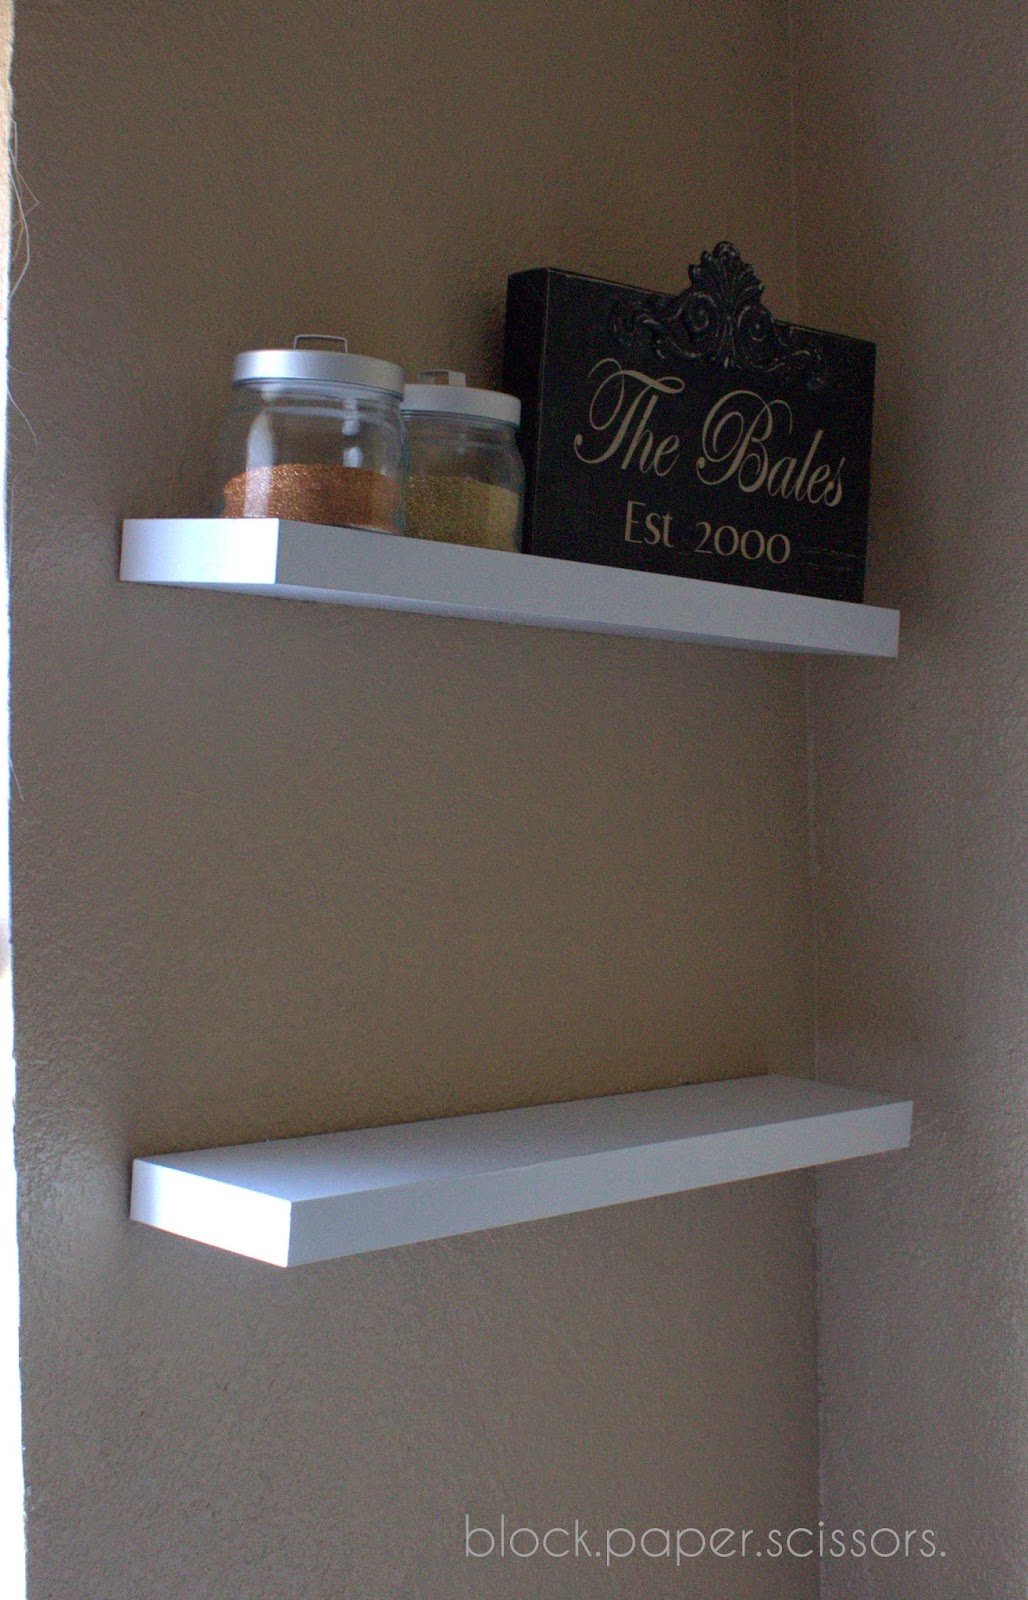 How To Fix Leaning Shelves, How To Stop Floating Shelves Leaning